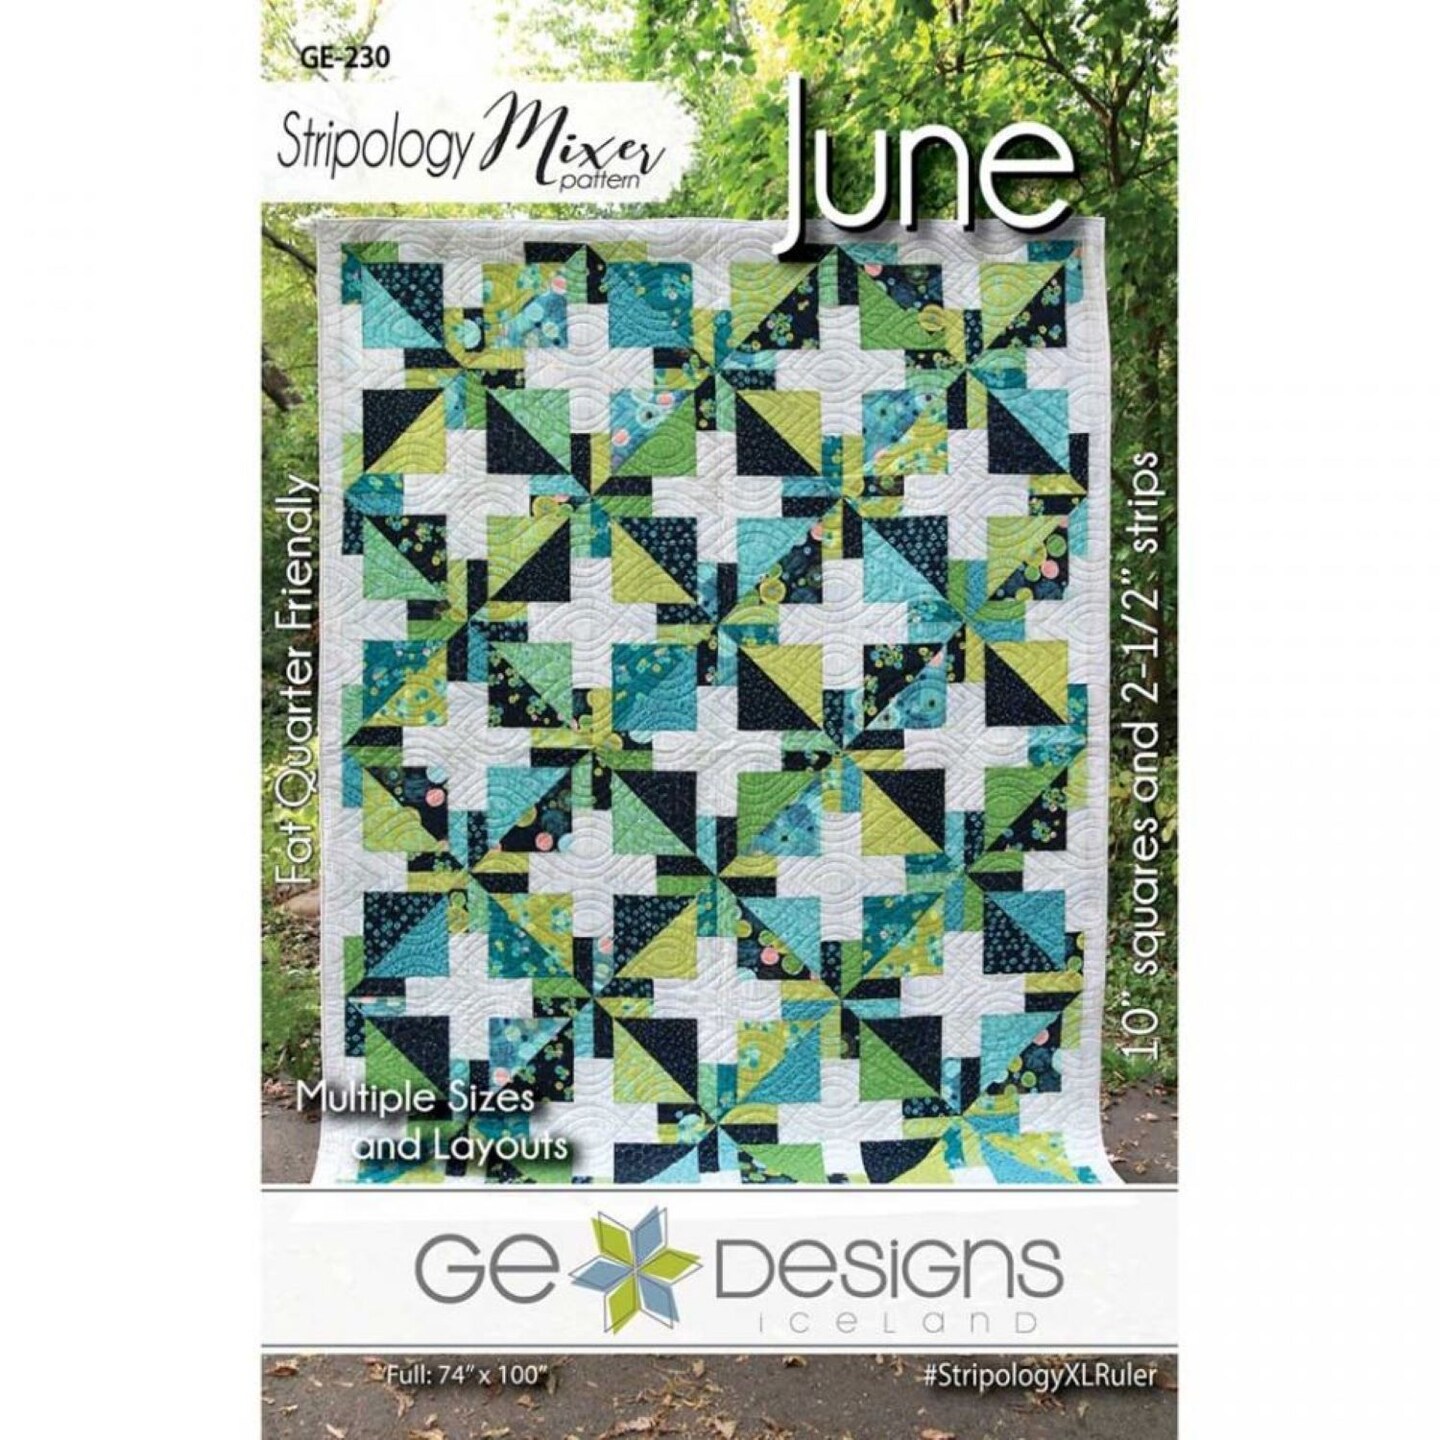 June Pattern Stripology Mixer by GE Designs 4 Sizes Uses 10 In Sq and Strips